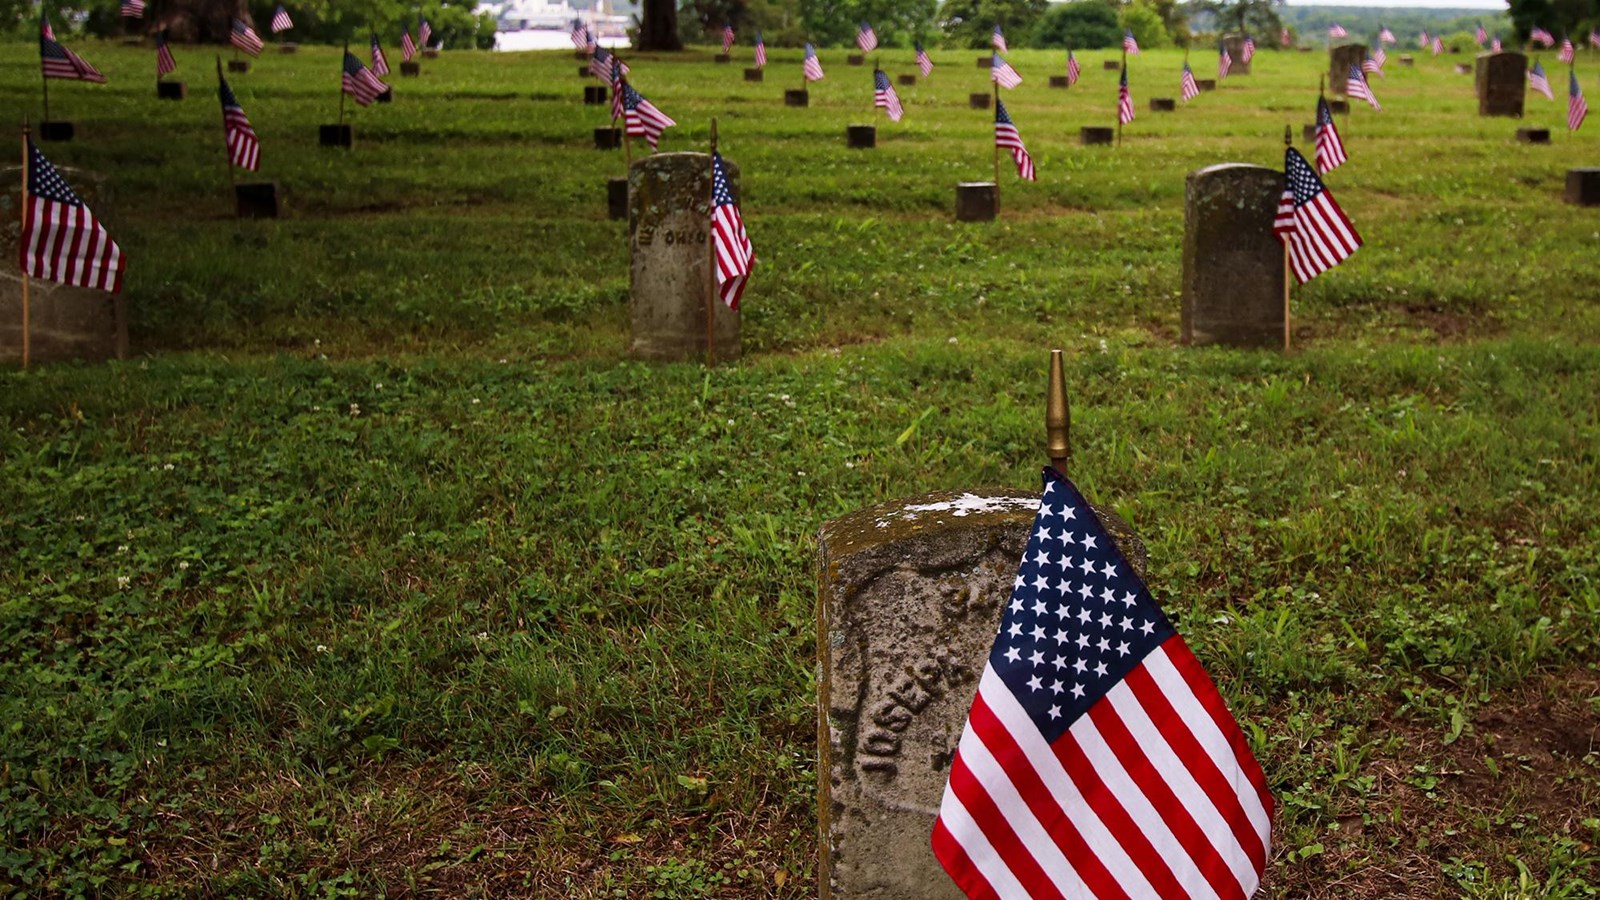 Rows of military headstones with small American flags surrounded by trees.